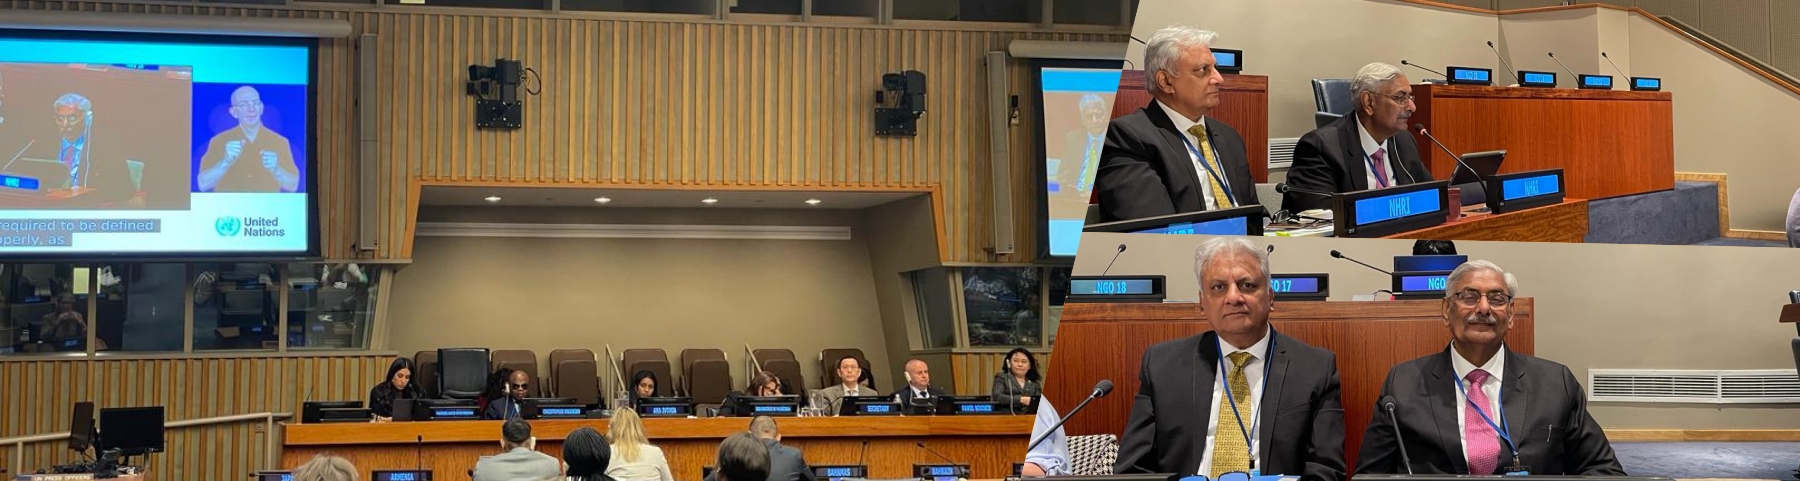 NHRC Chairperson and Member Participates in the 16th Session of the Conference of State Parties to the Convention on Rights of Persons with Disabilities in UN HQ, New York